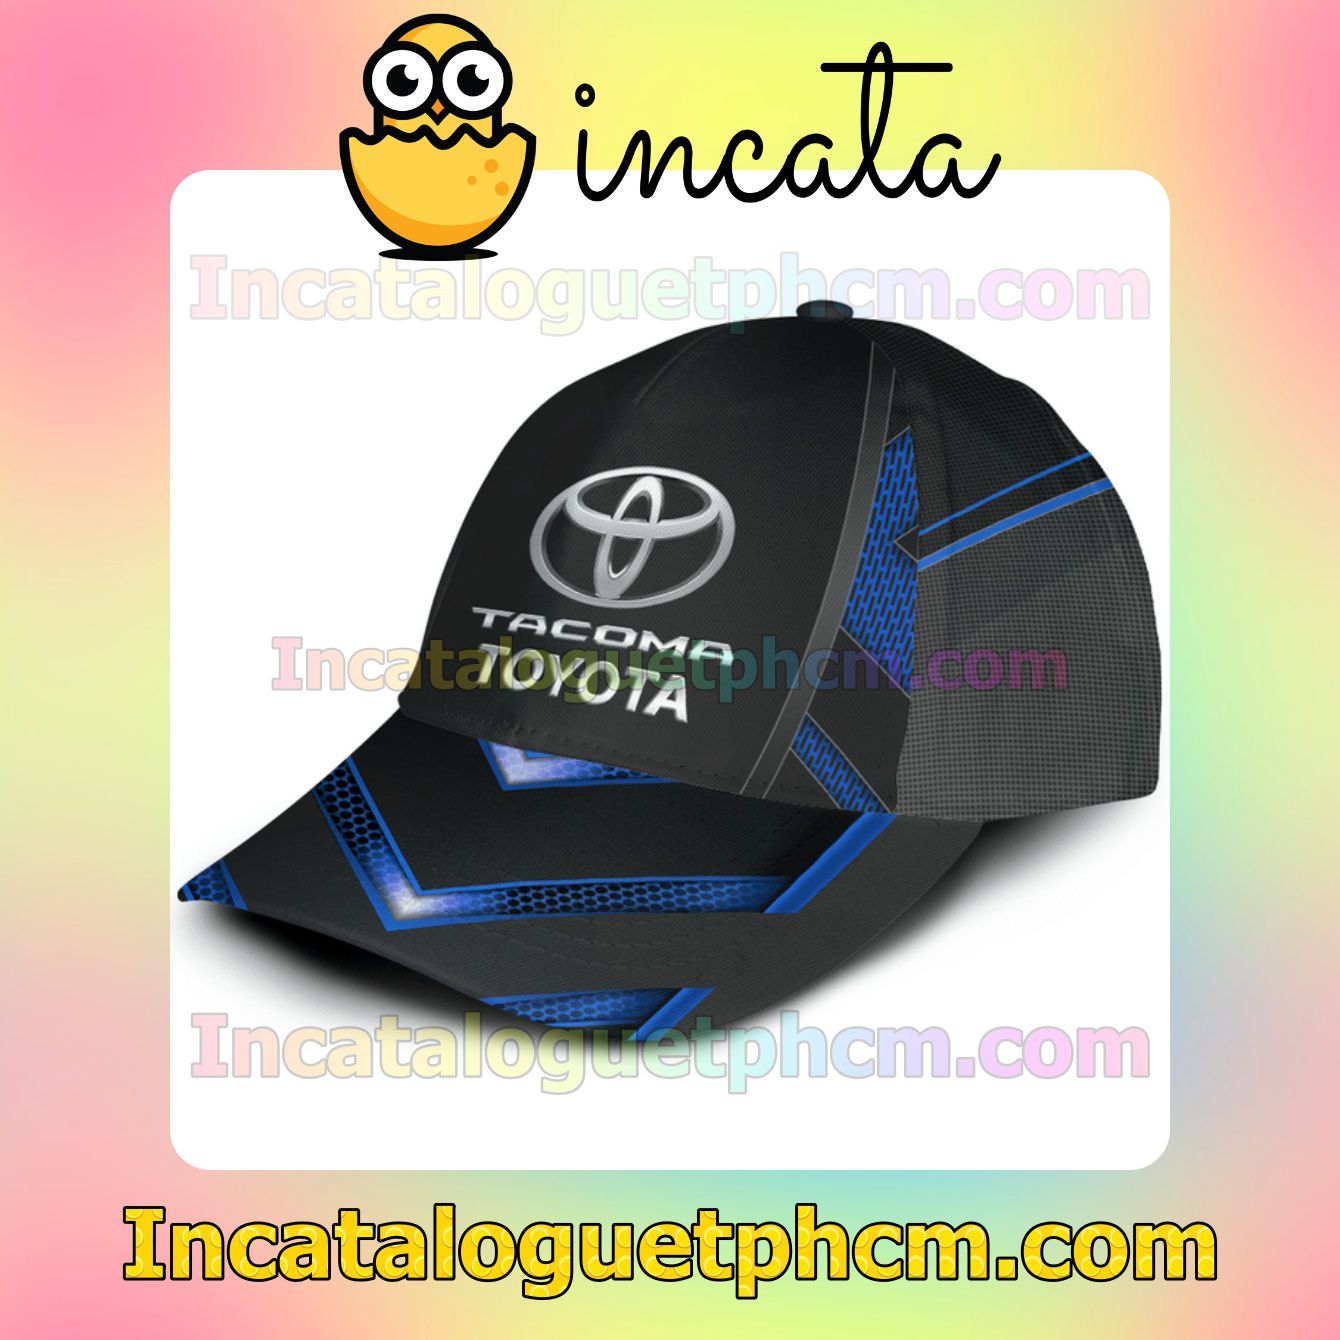 New Toyota Tacoma Black And Blue Classic Hat Caps Gift For Men